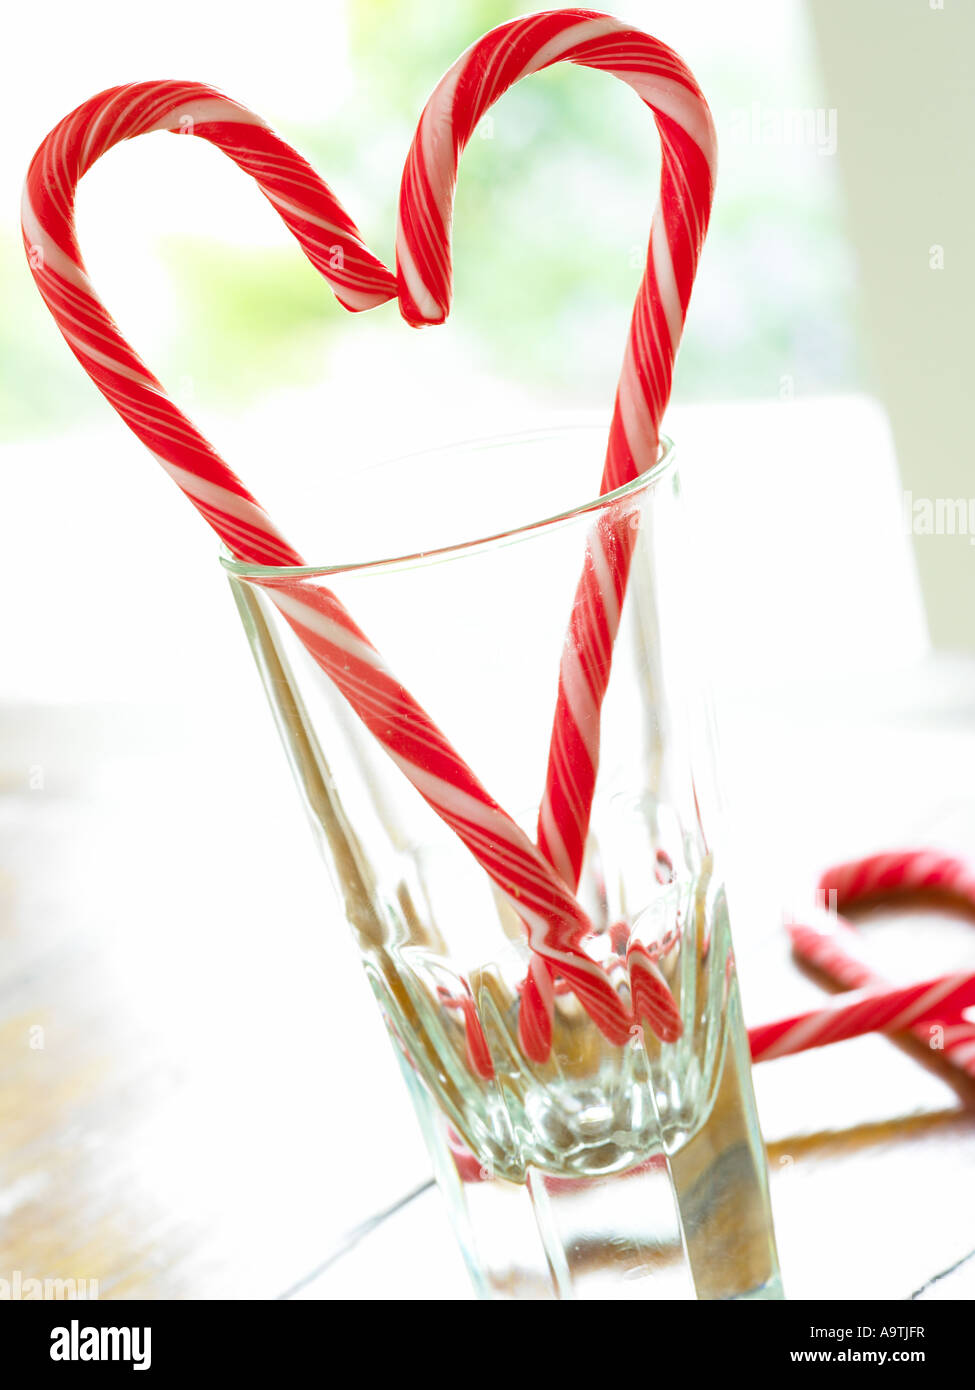 red and white candy cane sticks making a symbol of a hart shape in a glass tumbler backlit by window light Stock Photo